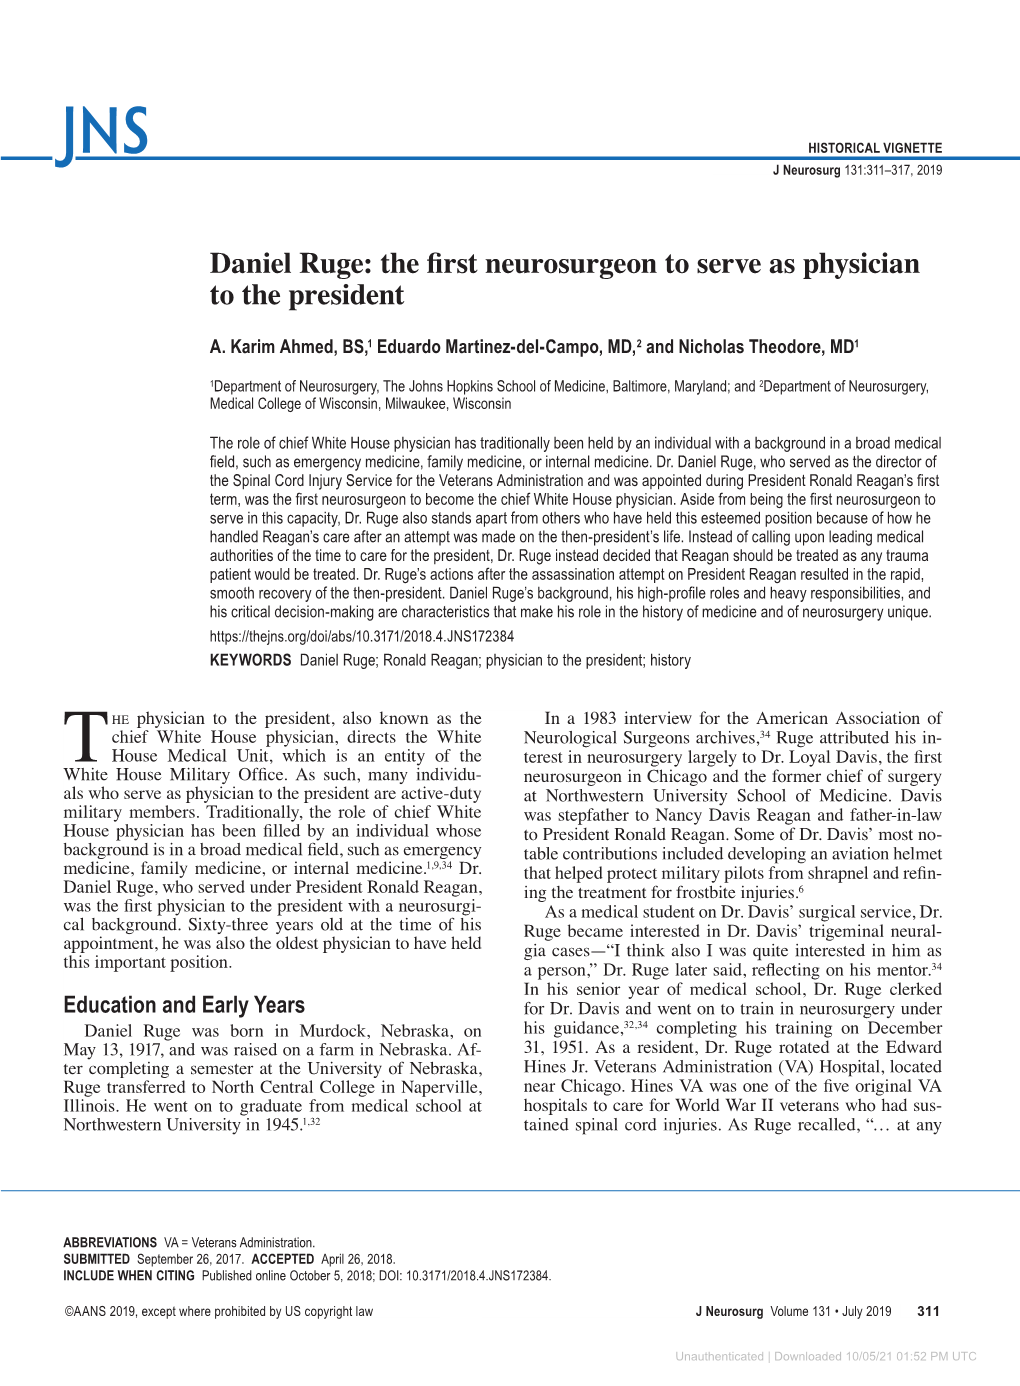 Daniel Ruge: the First Neurosurgeon to Serve As Physician to the President